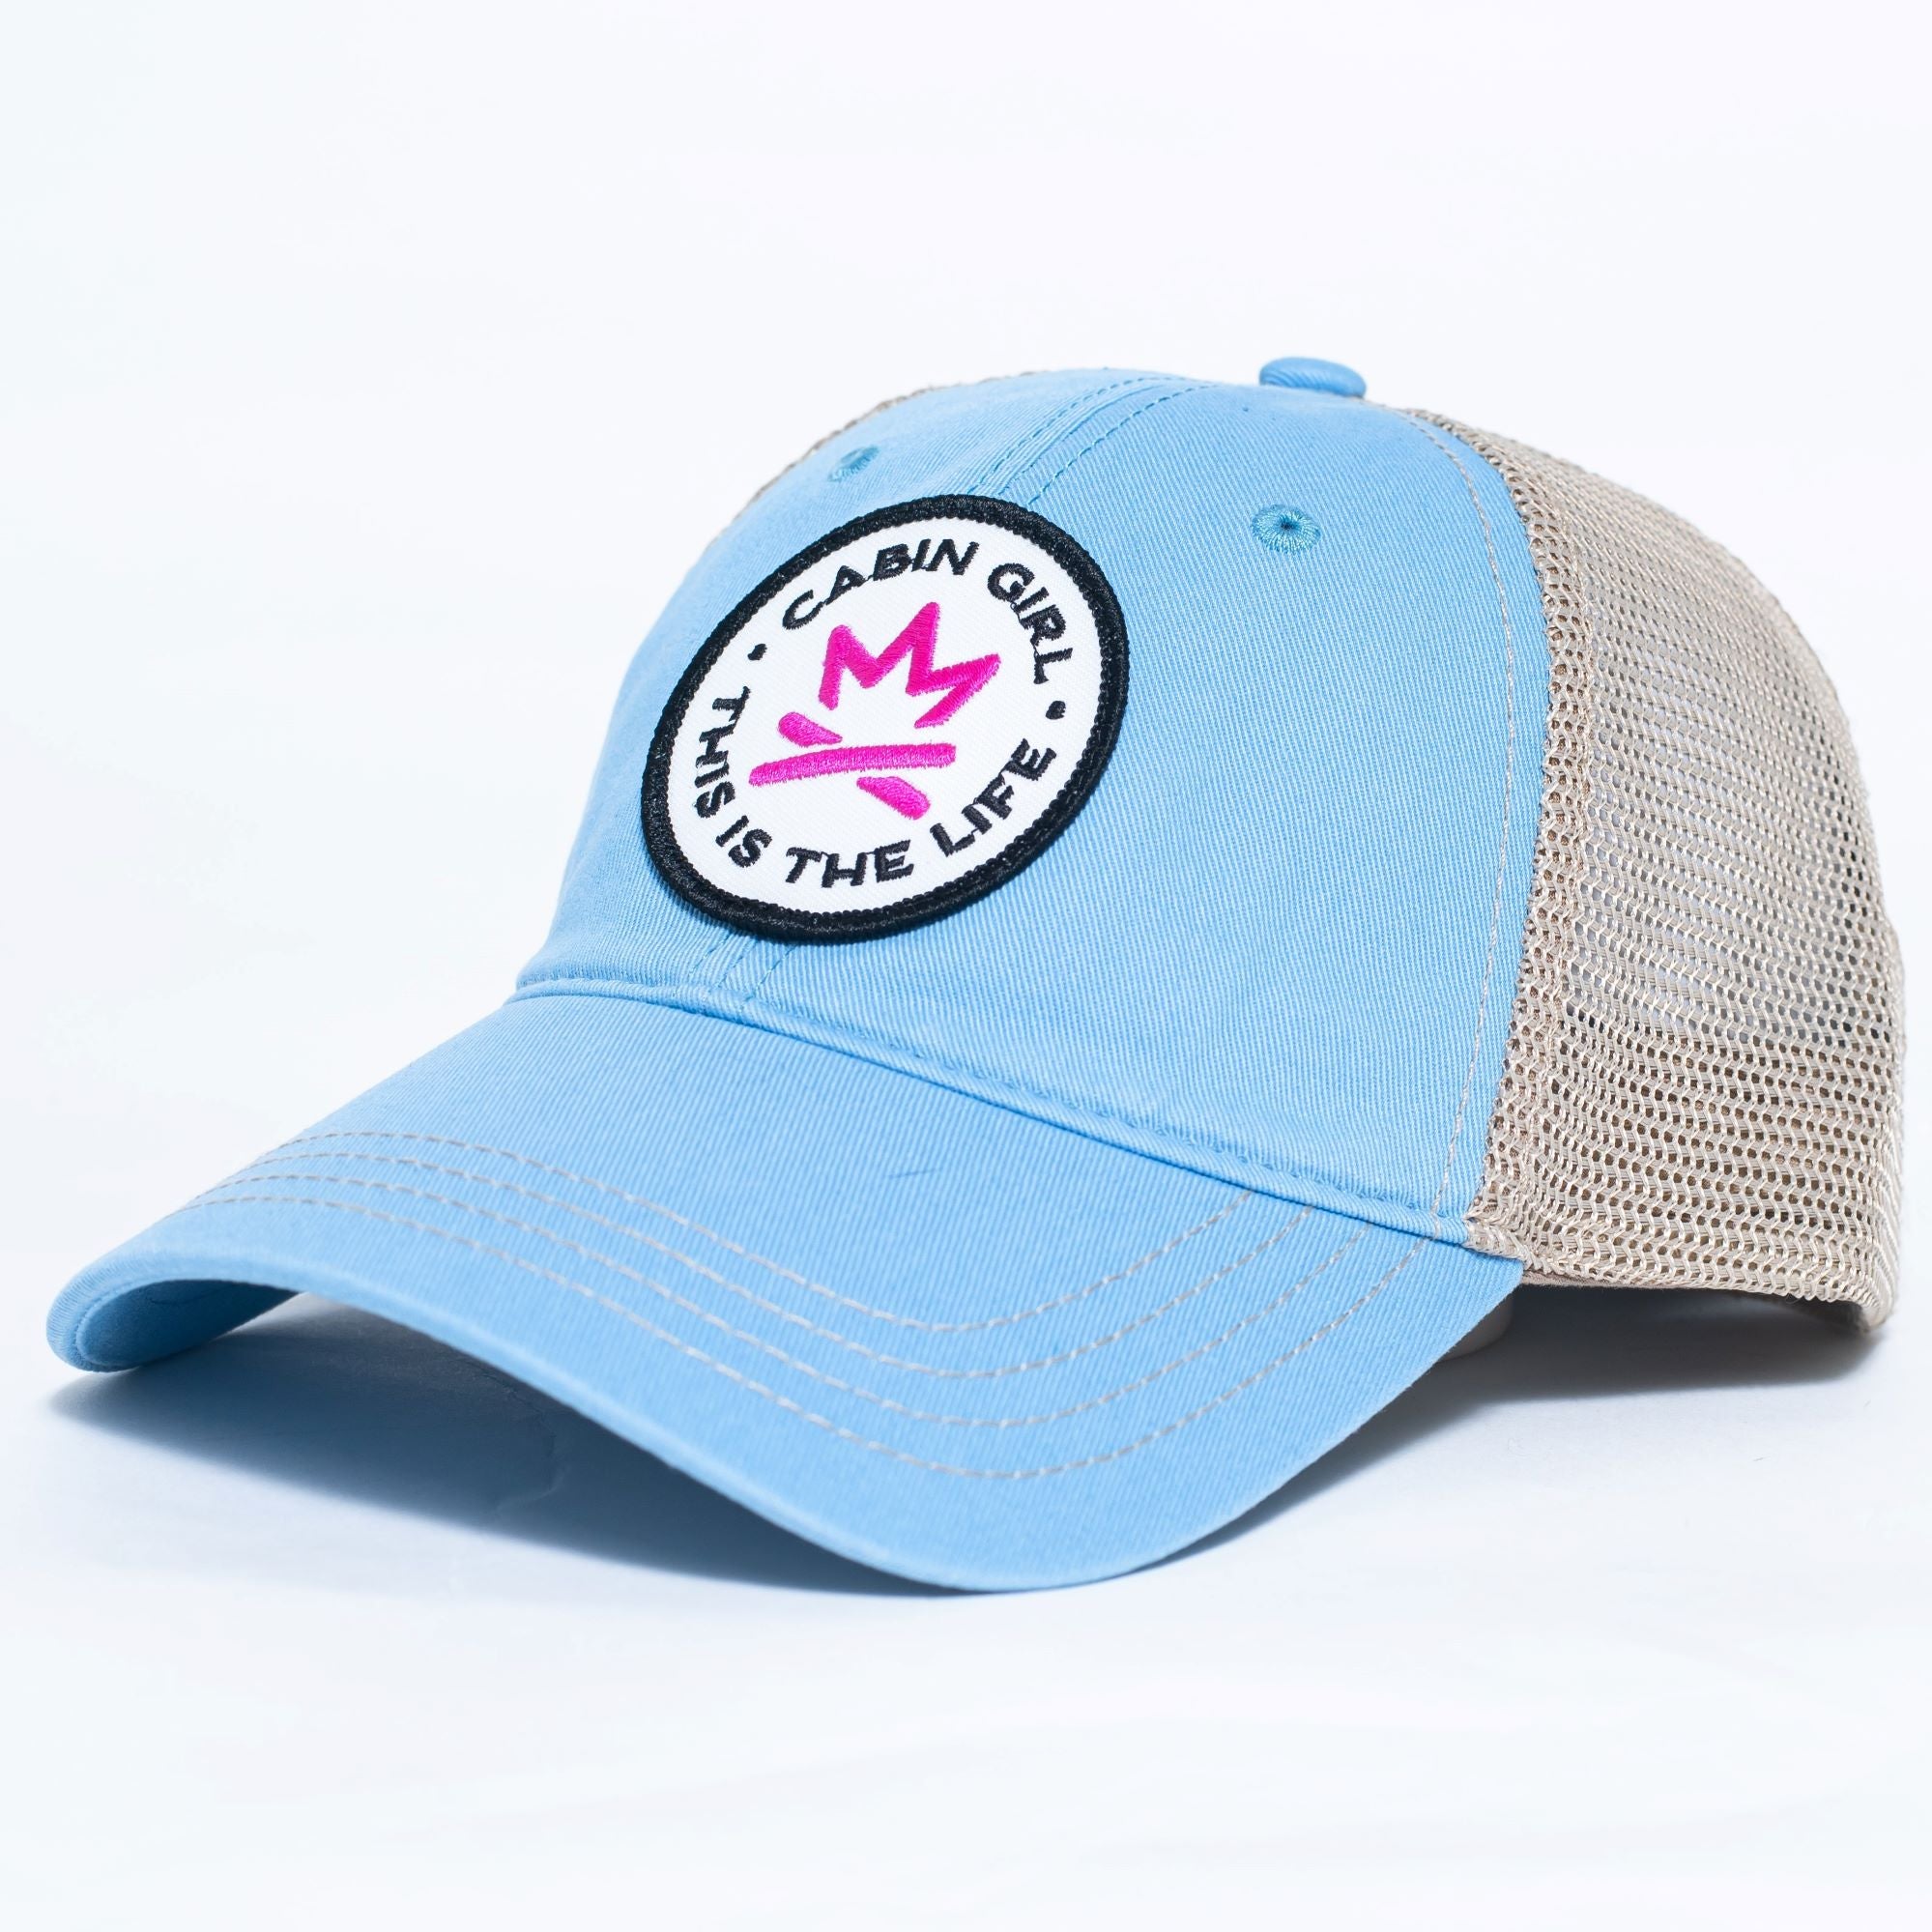 lake tahoe cabin snapback hat with embroidered patch